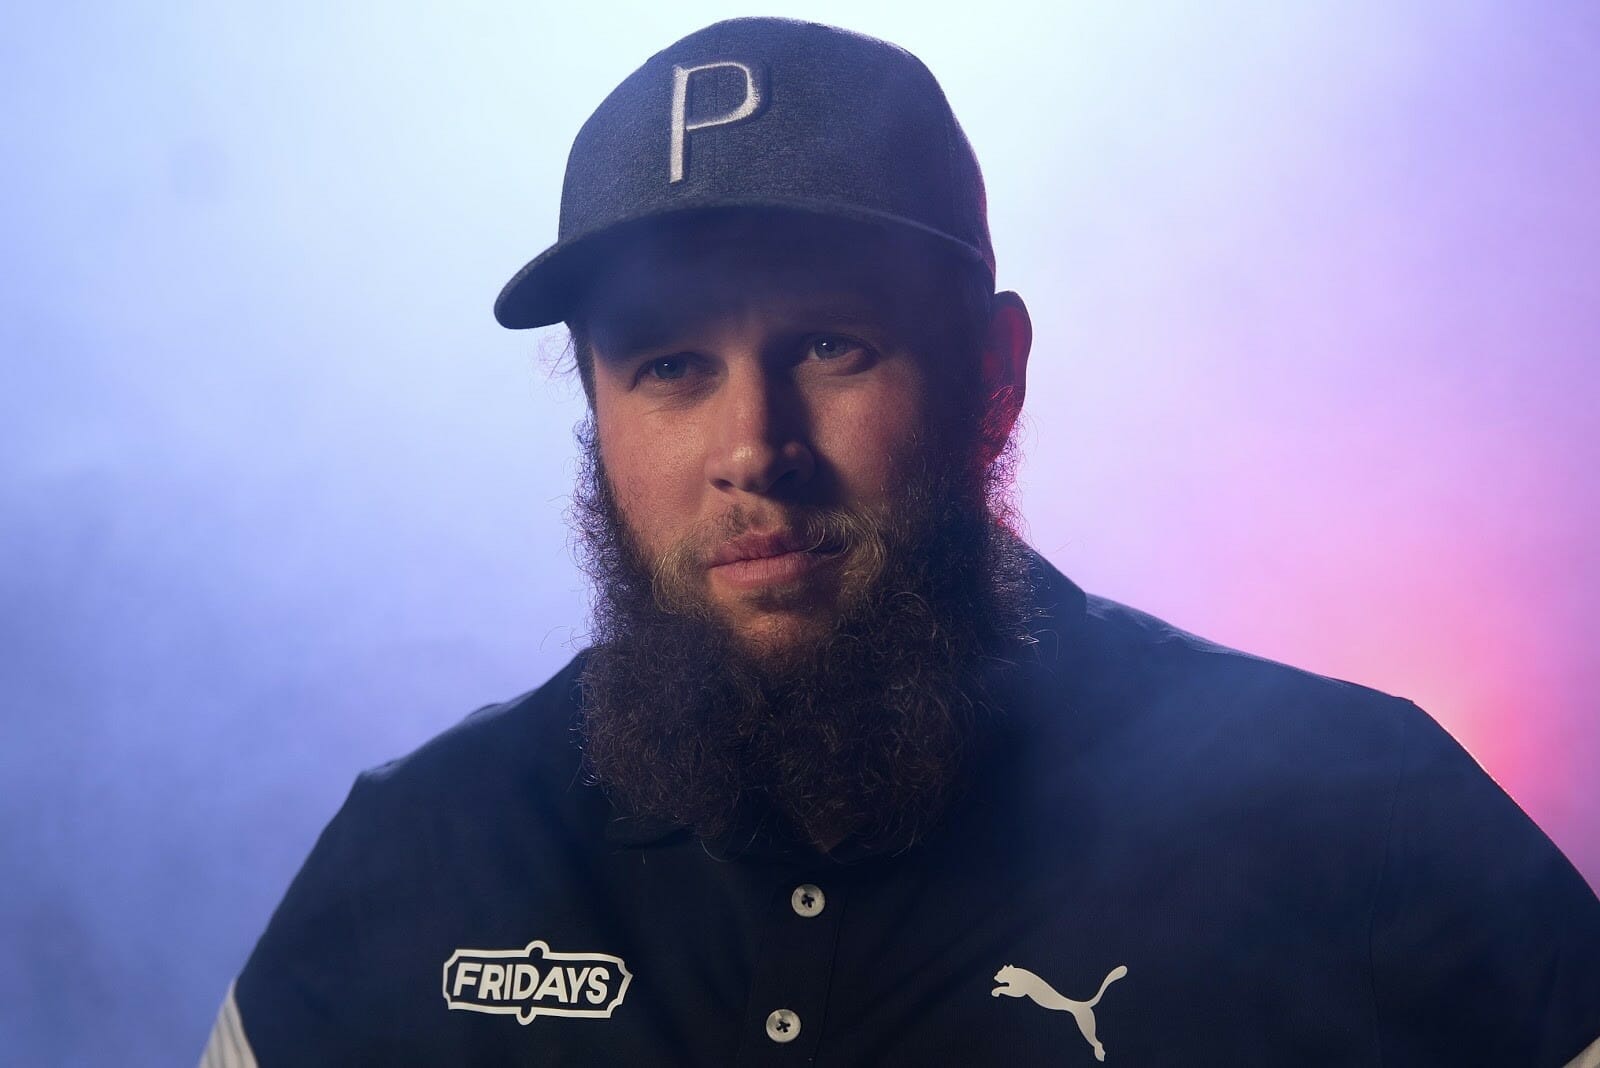 THE BEEF IS BACK – Fridays announce sponsorship of professional golfer Andrew ‘Beef’ Johnston